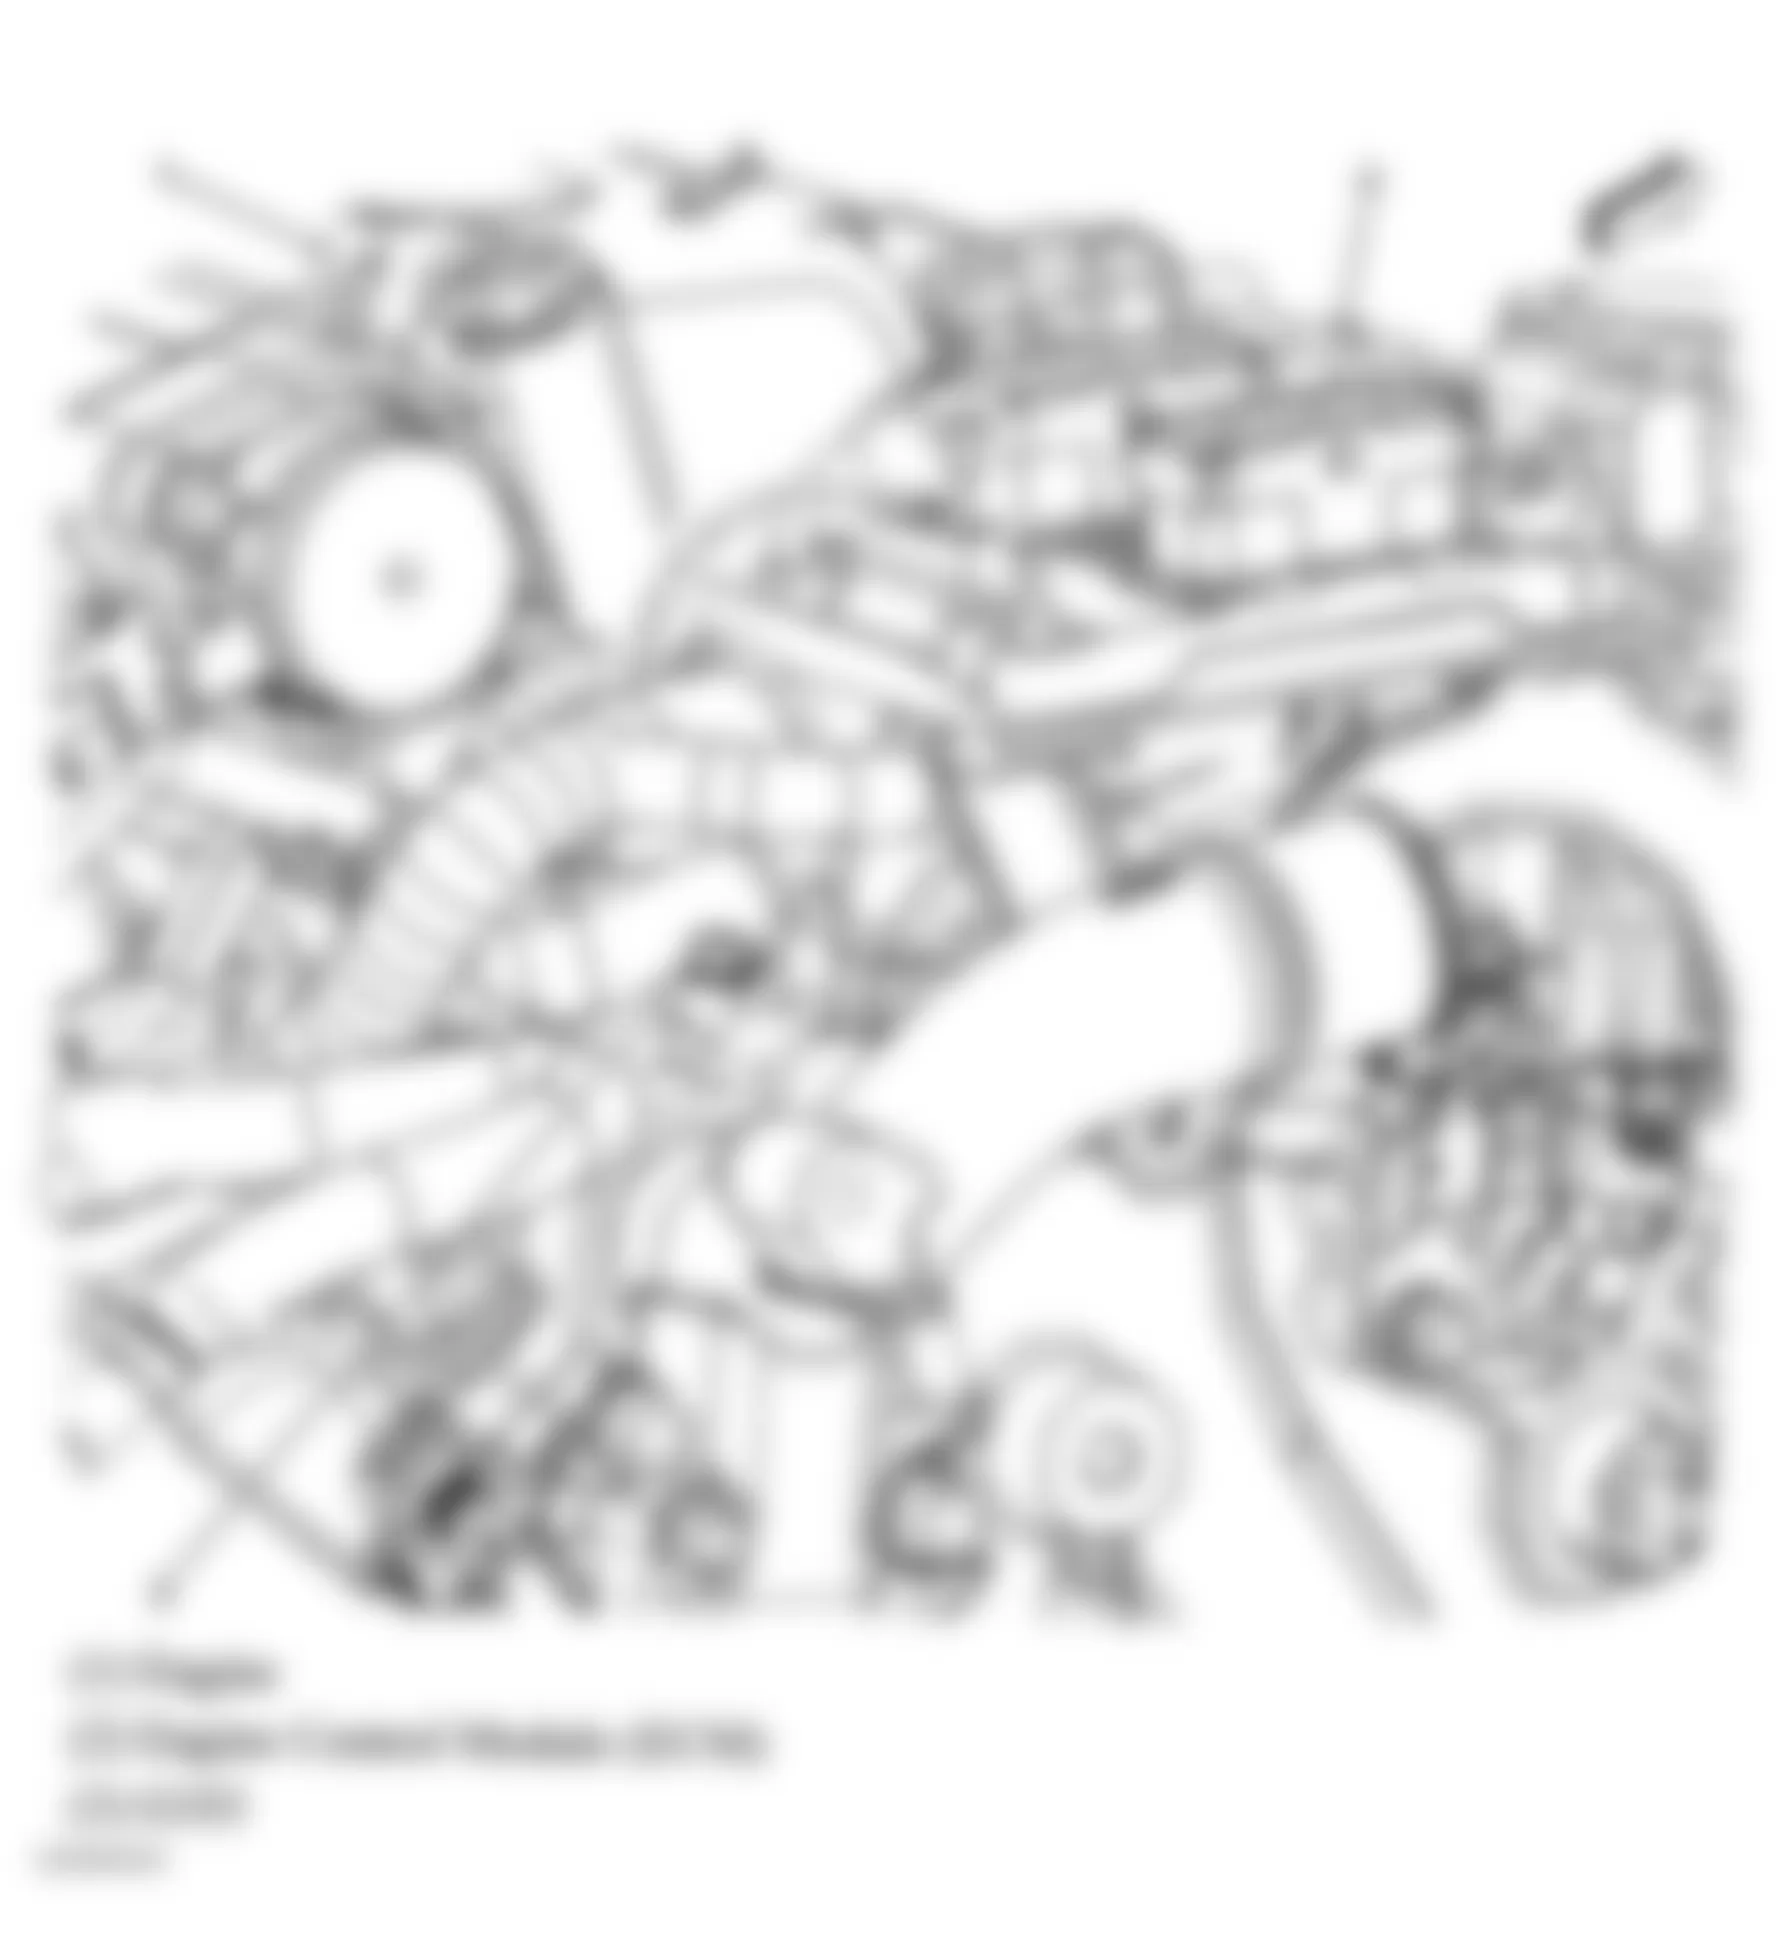 Buick Allure CXL 2006 - Component Locations -  Engine Assembly (3.6L)